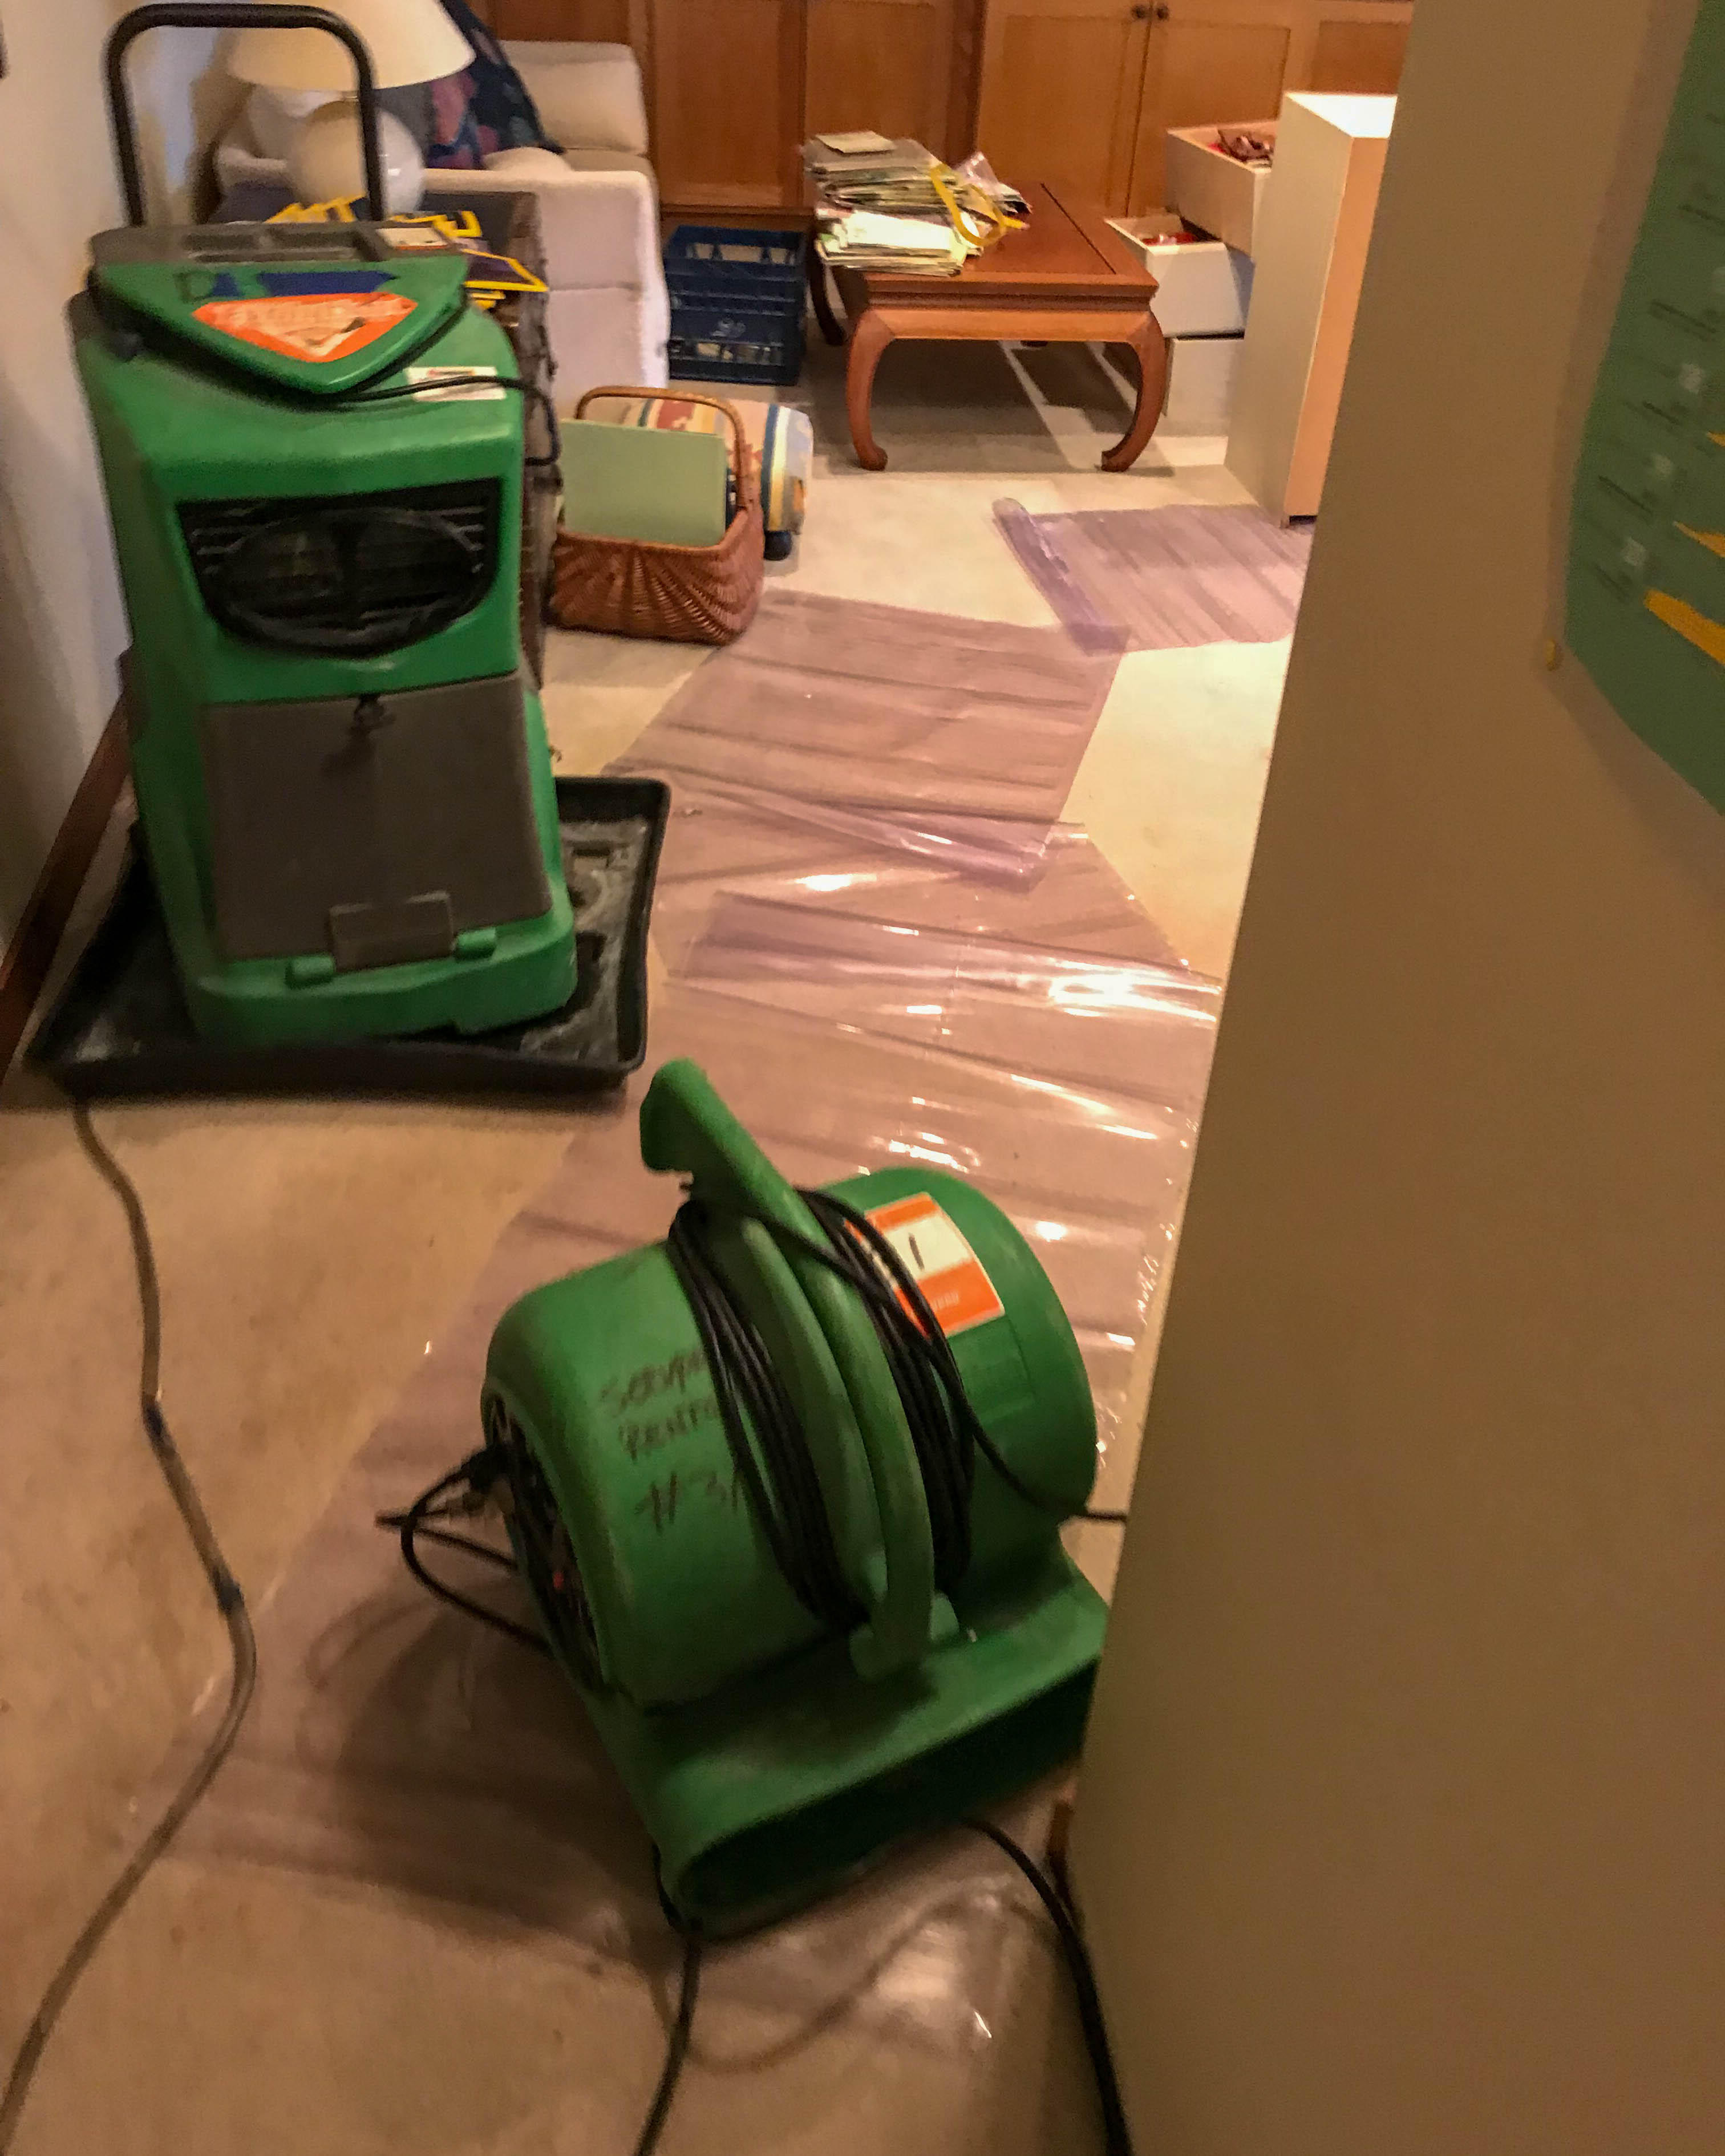 SERVPRO of Issaquah/North Bend is the industry leader in fire and water damage repair.